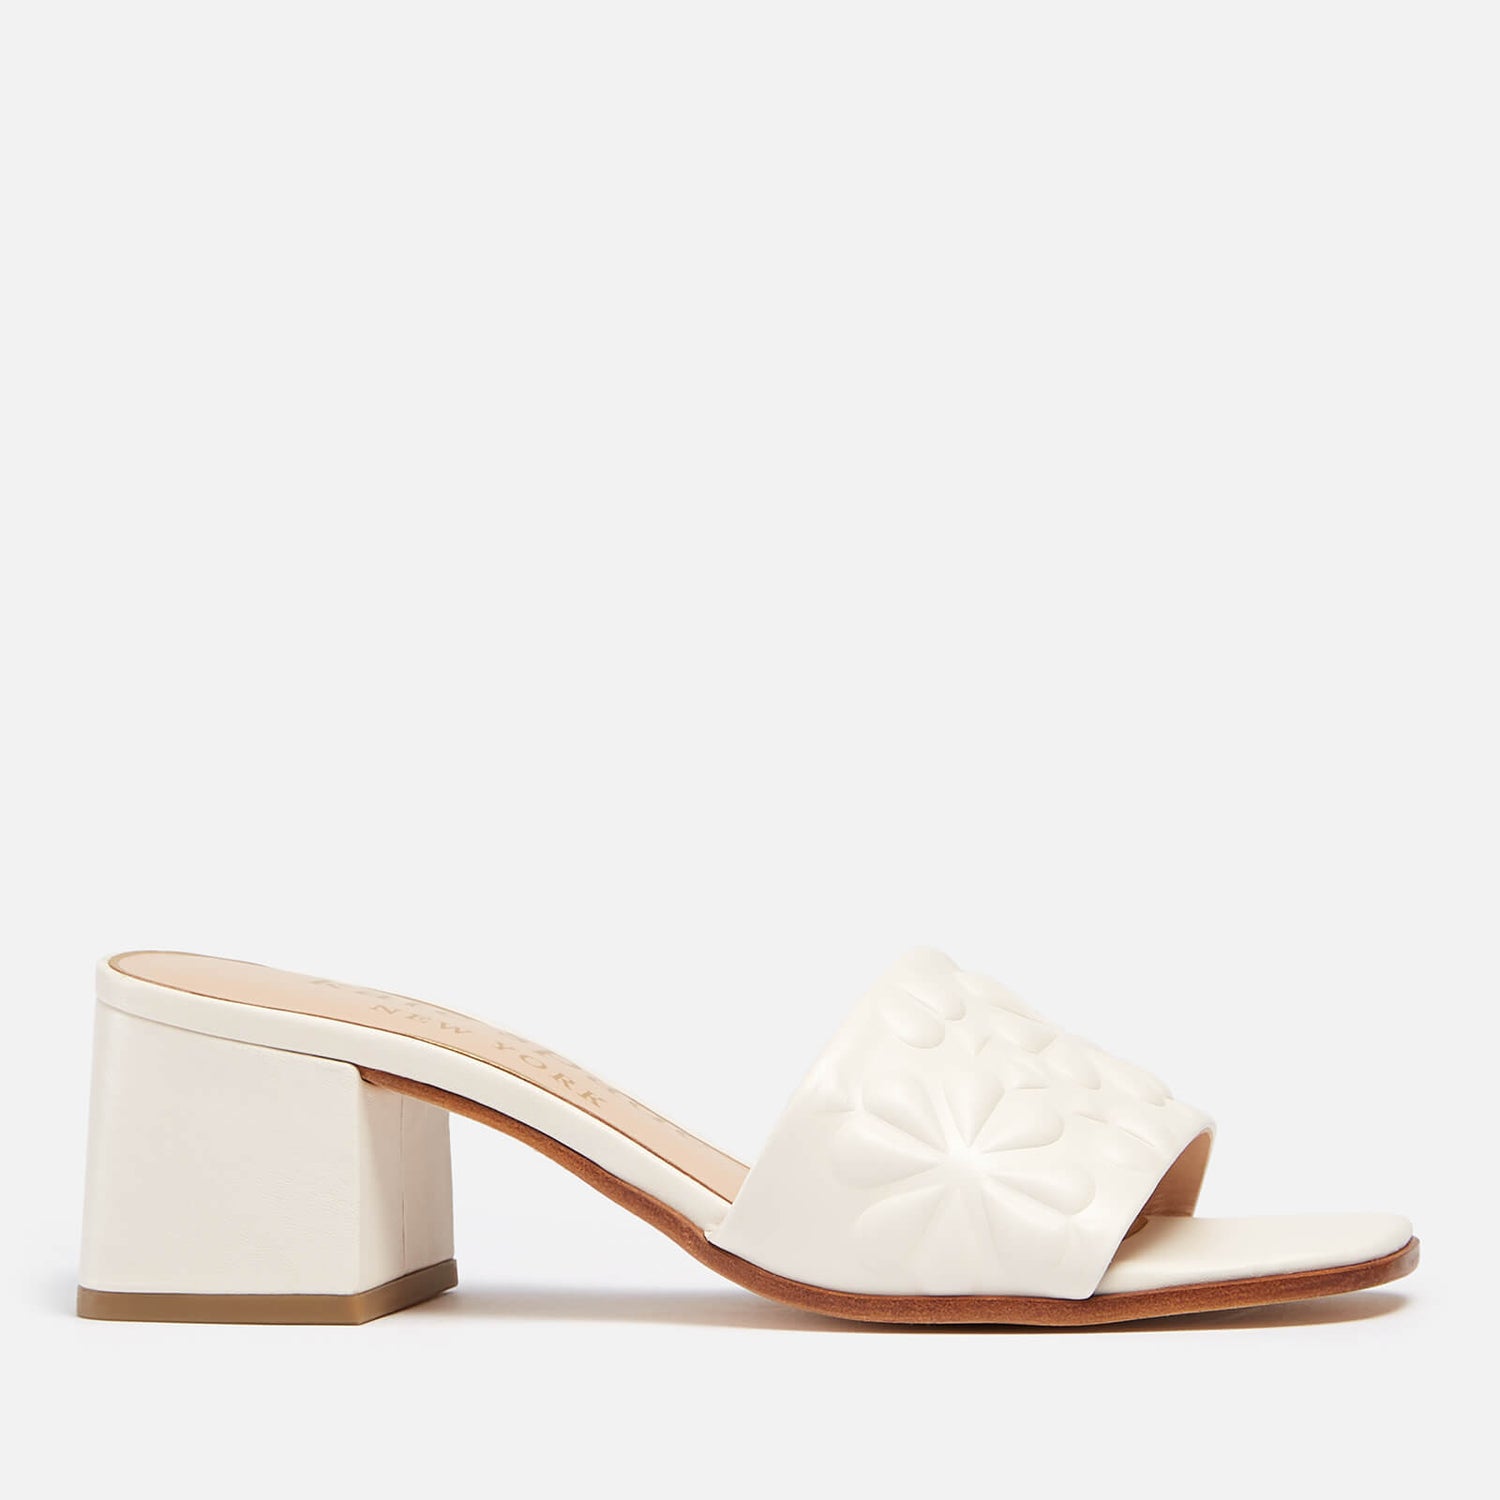 Kate Spade New York Women's Emmie Mid Leather Heeled Mules - Parchment